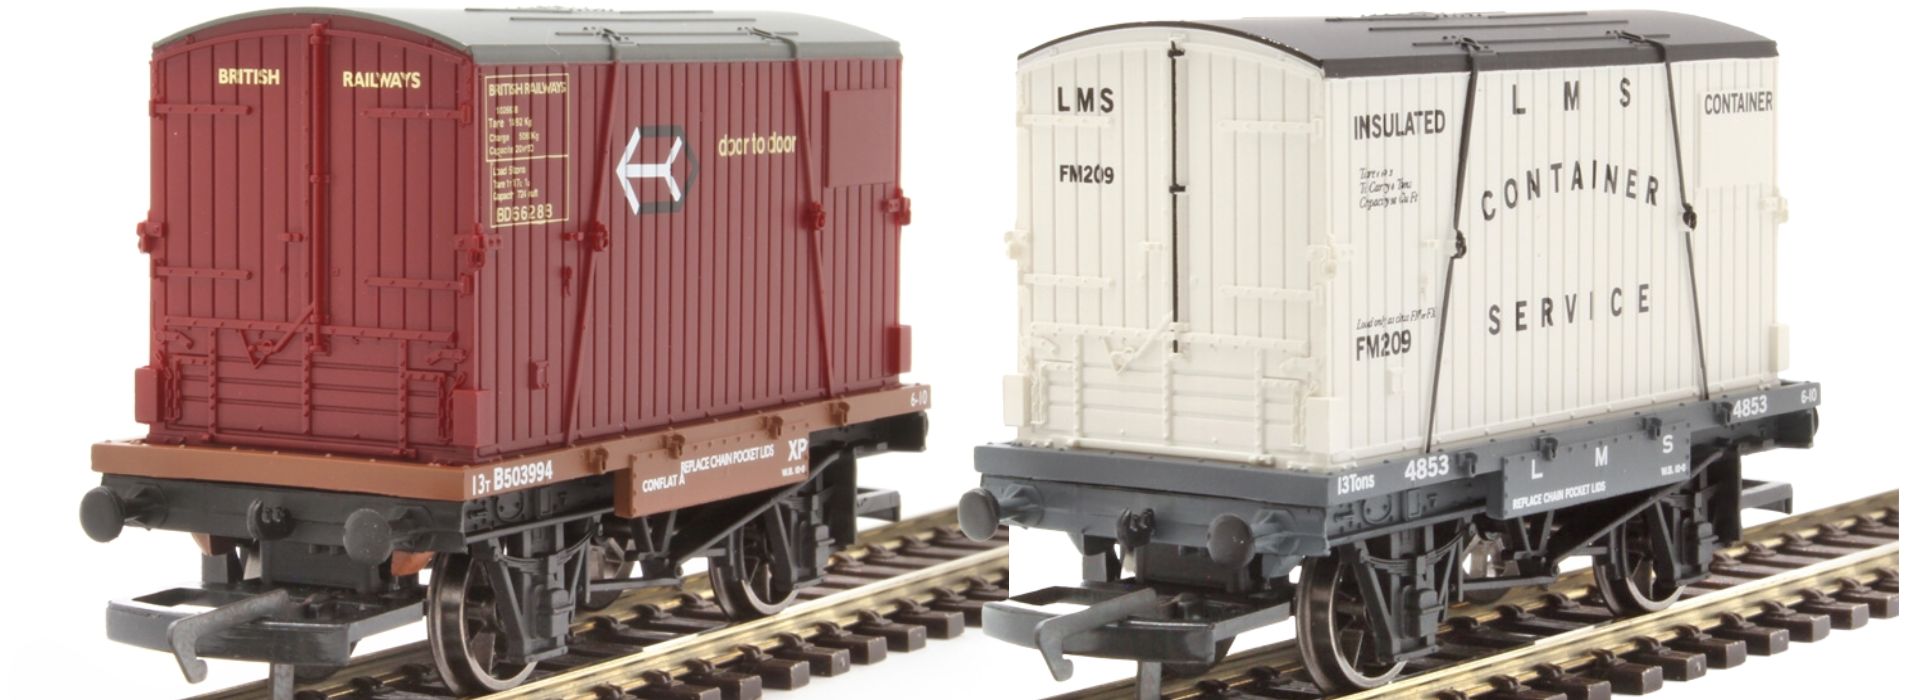 Airfix GMR (Great Model Railways) OO Gauge (1:76 Scale) Conflat container flat